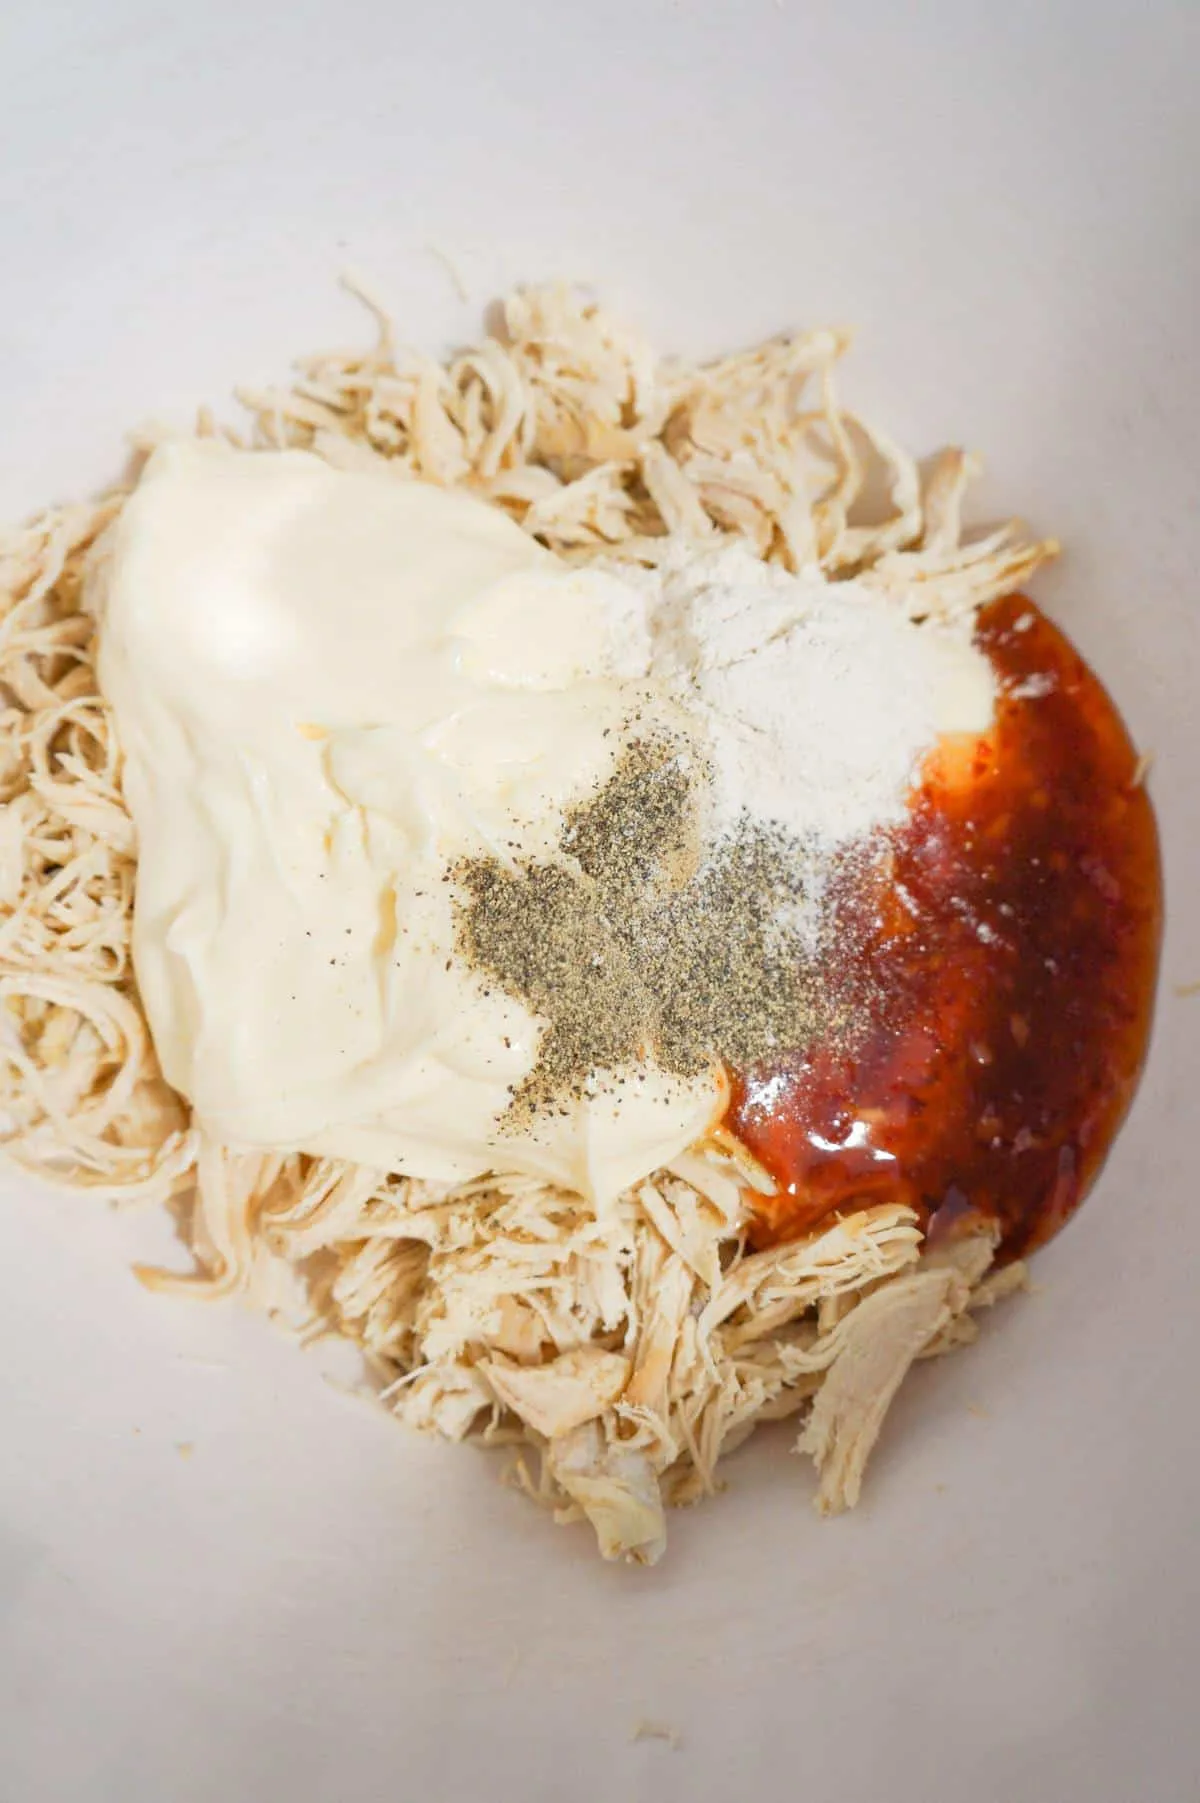 salt, pepper, mayo and sweet chili sauce on top of shredded chicken in a mixing bowl